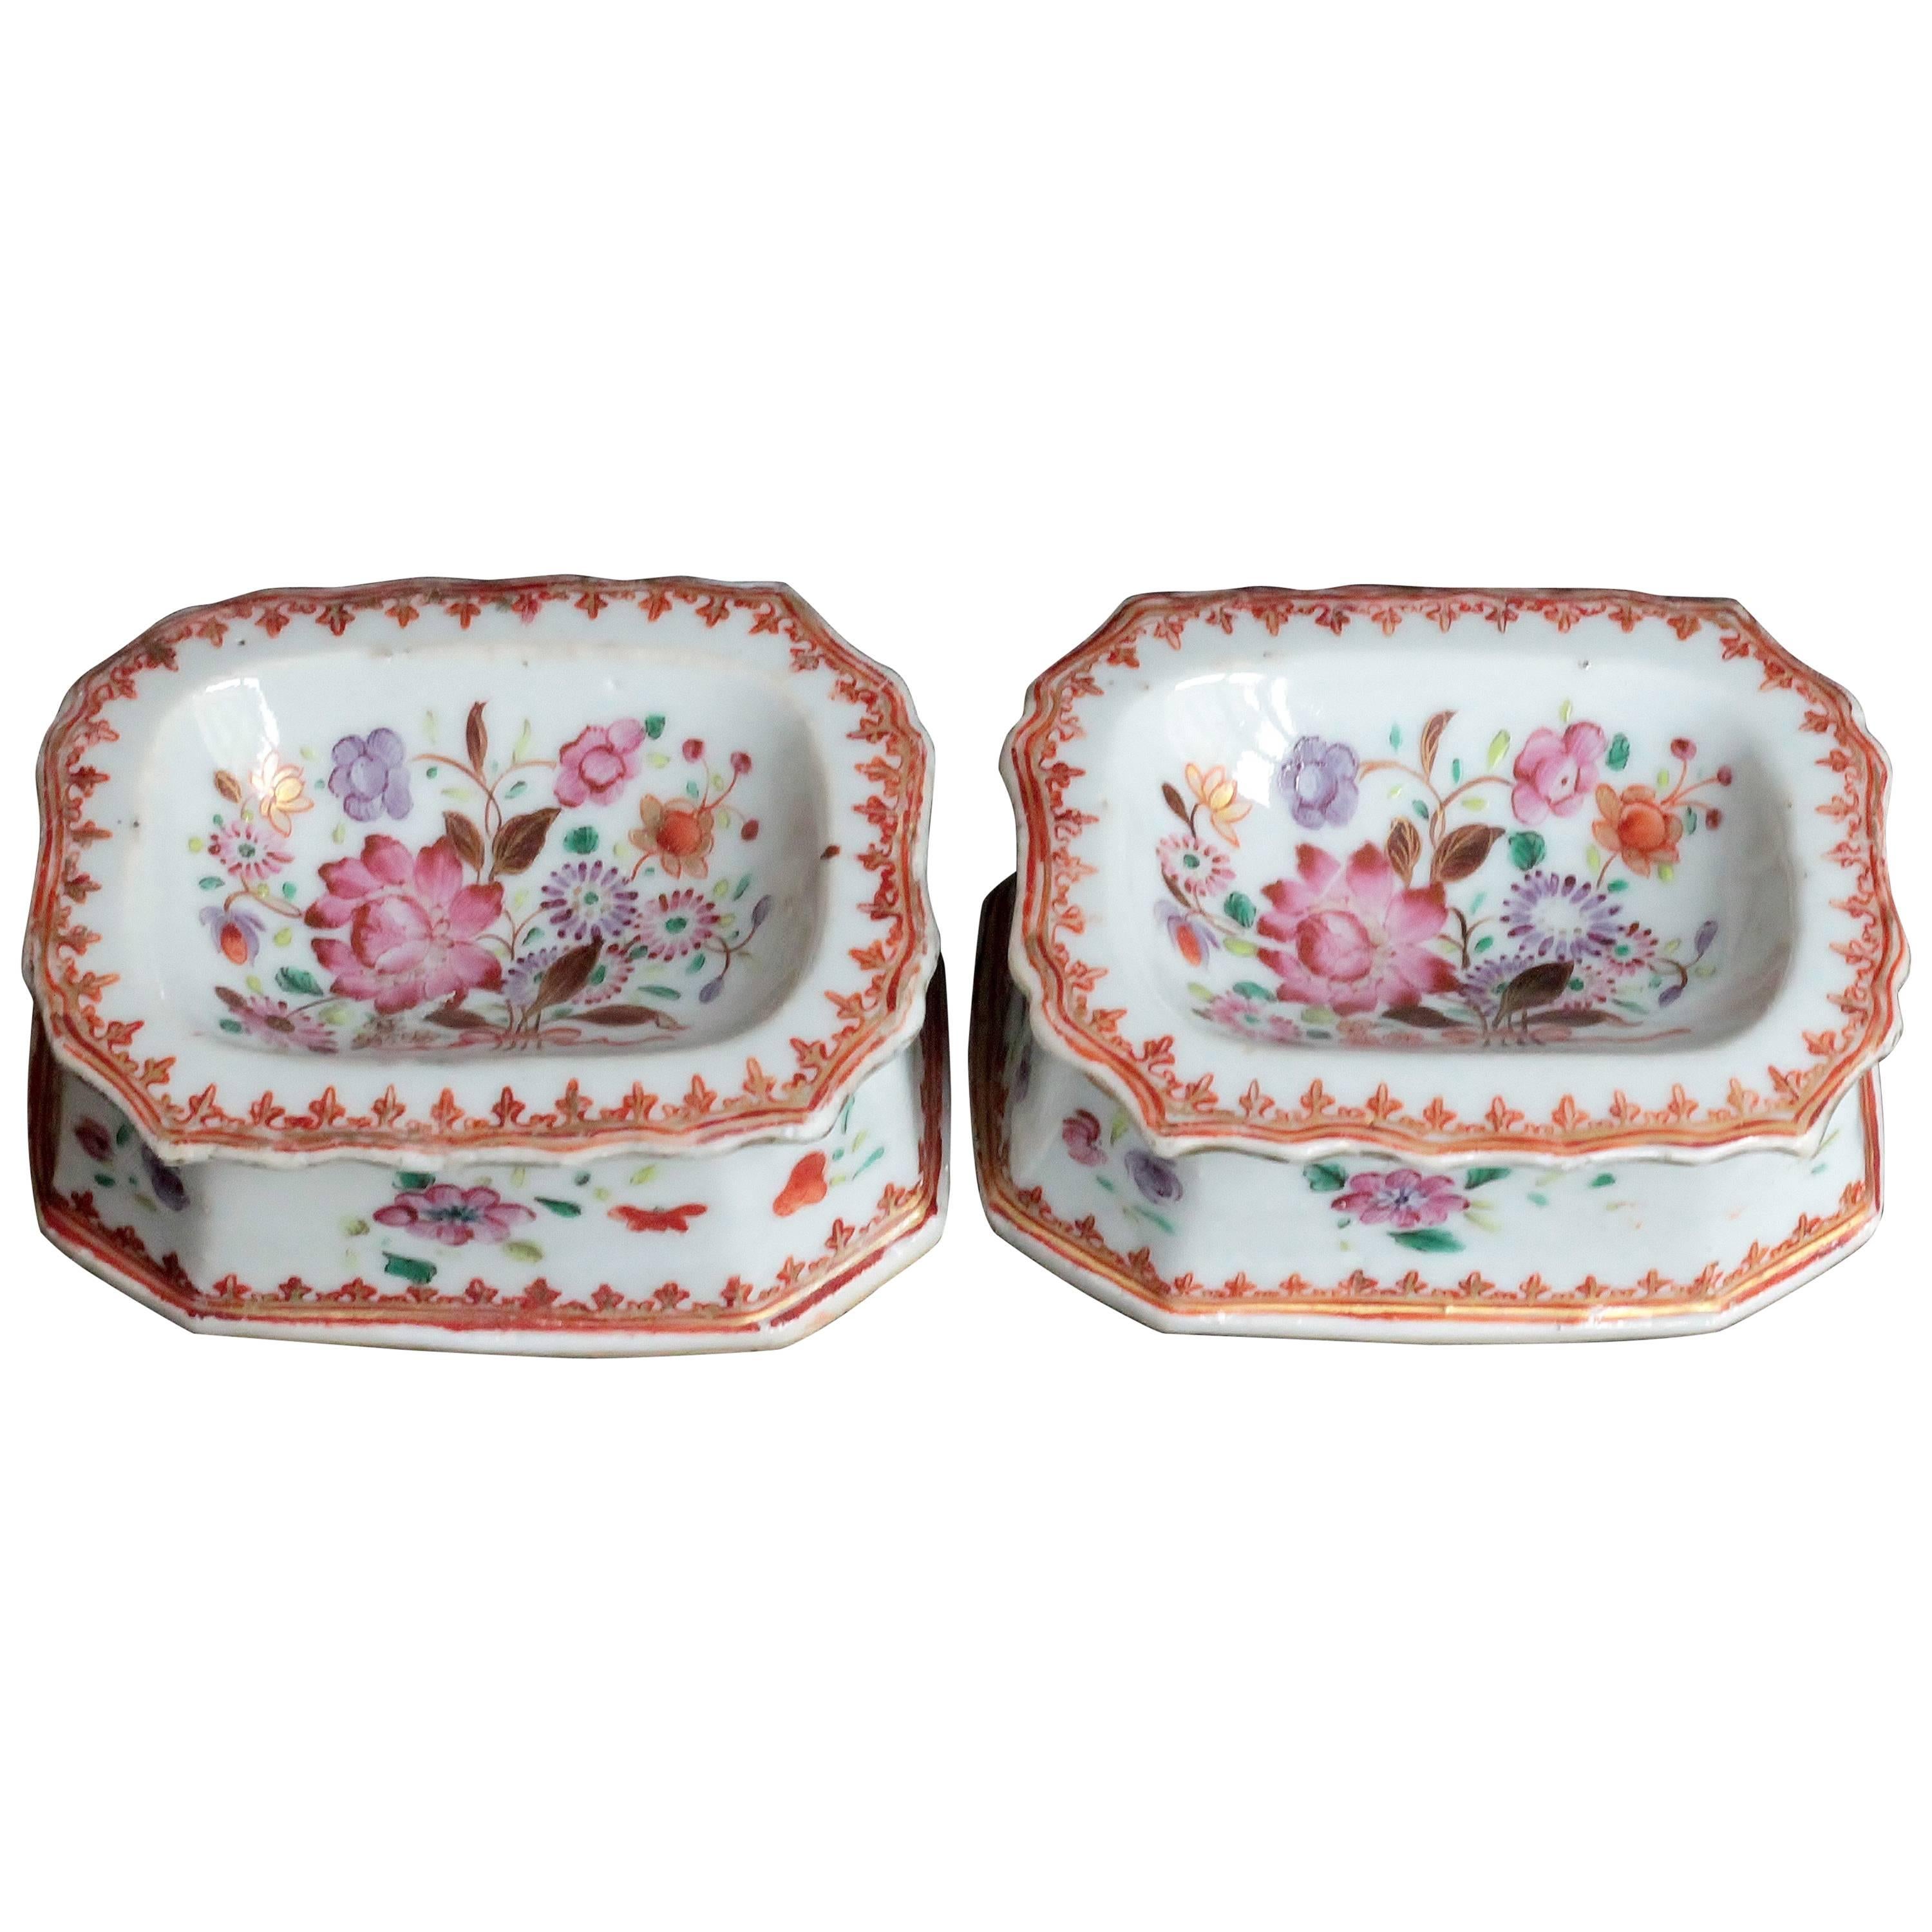 Pair of Rectangular Salts in Porcelain of China, Qianlong Period, 18th Century For Sale